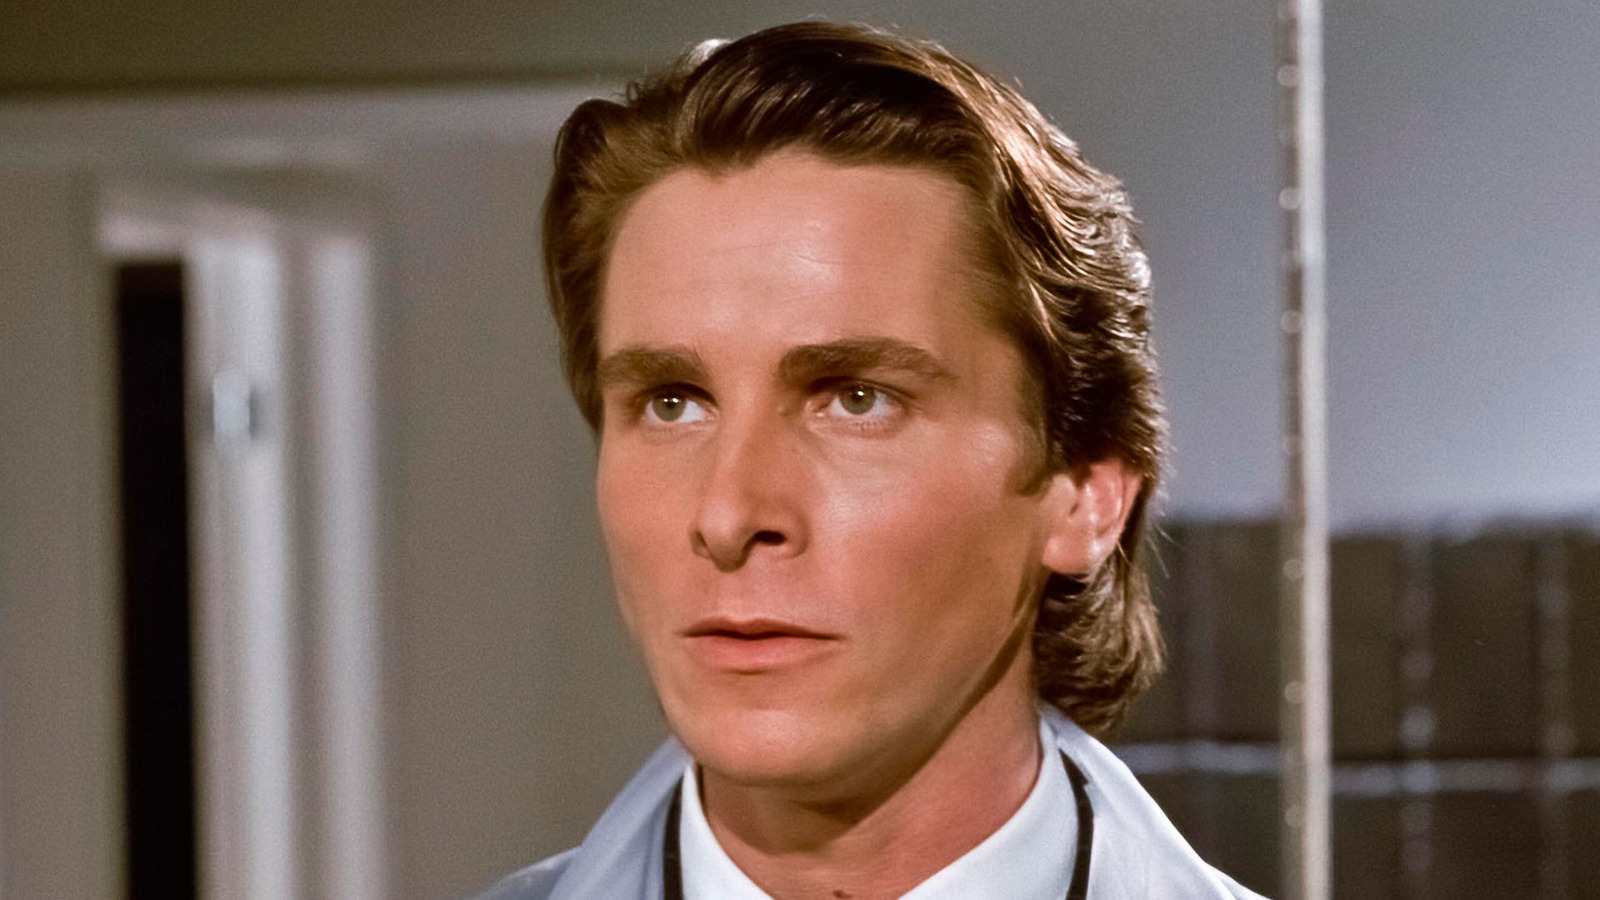 Christian Bale has been warned that American Psycho will end his career